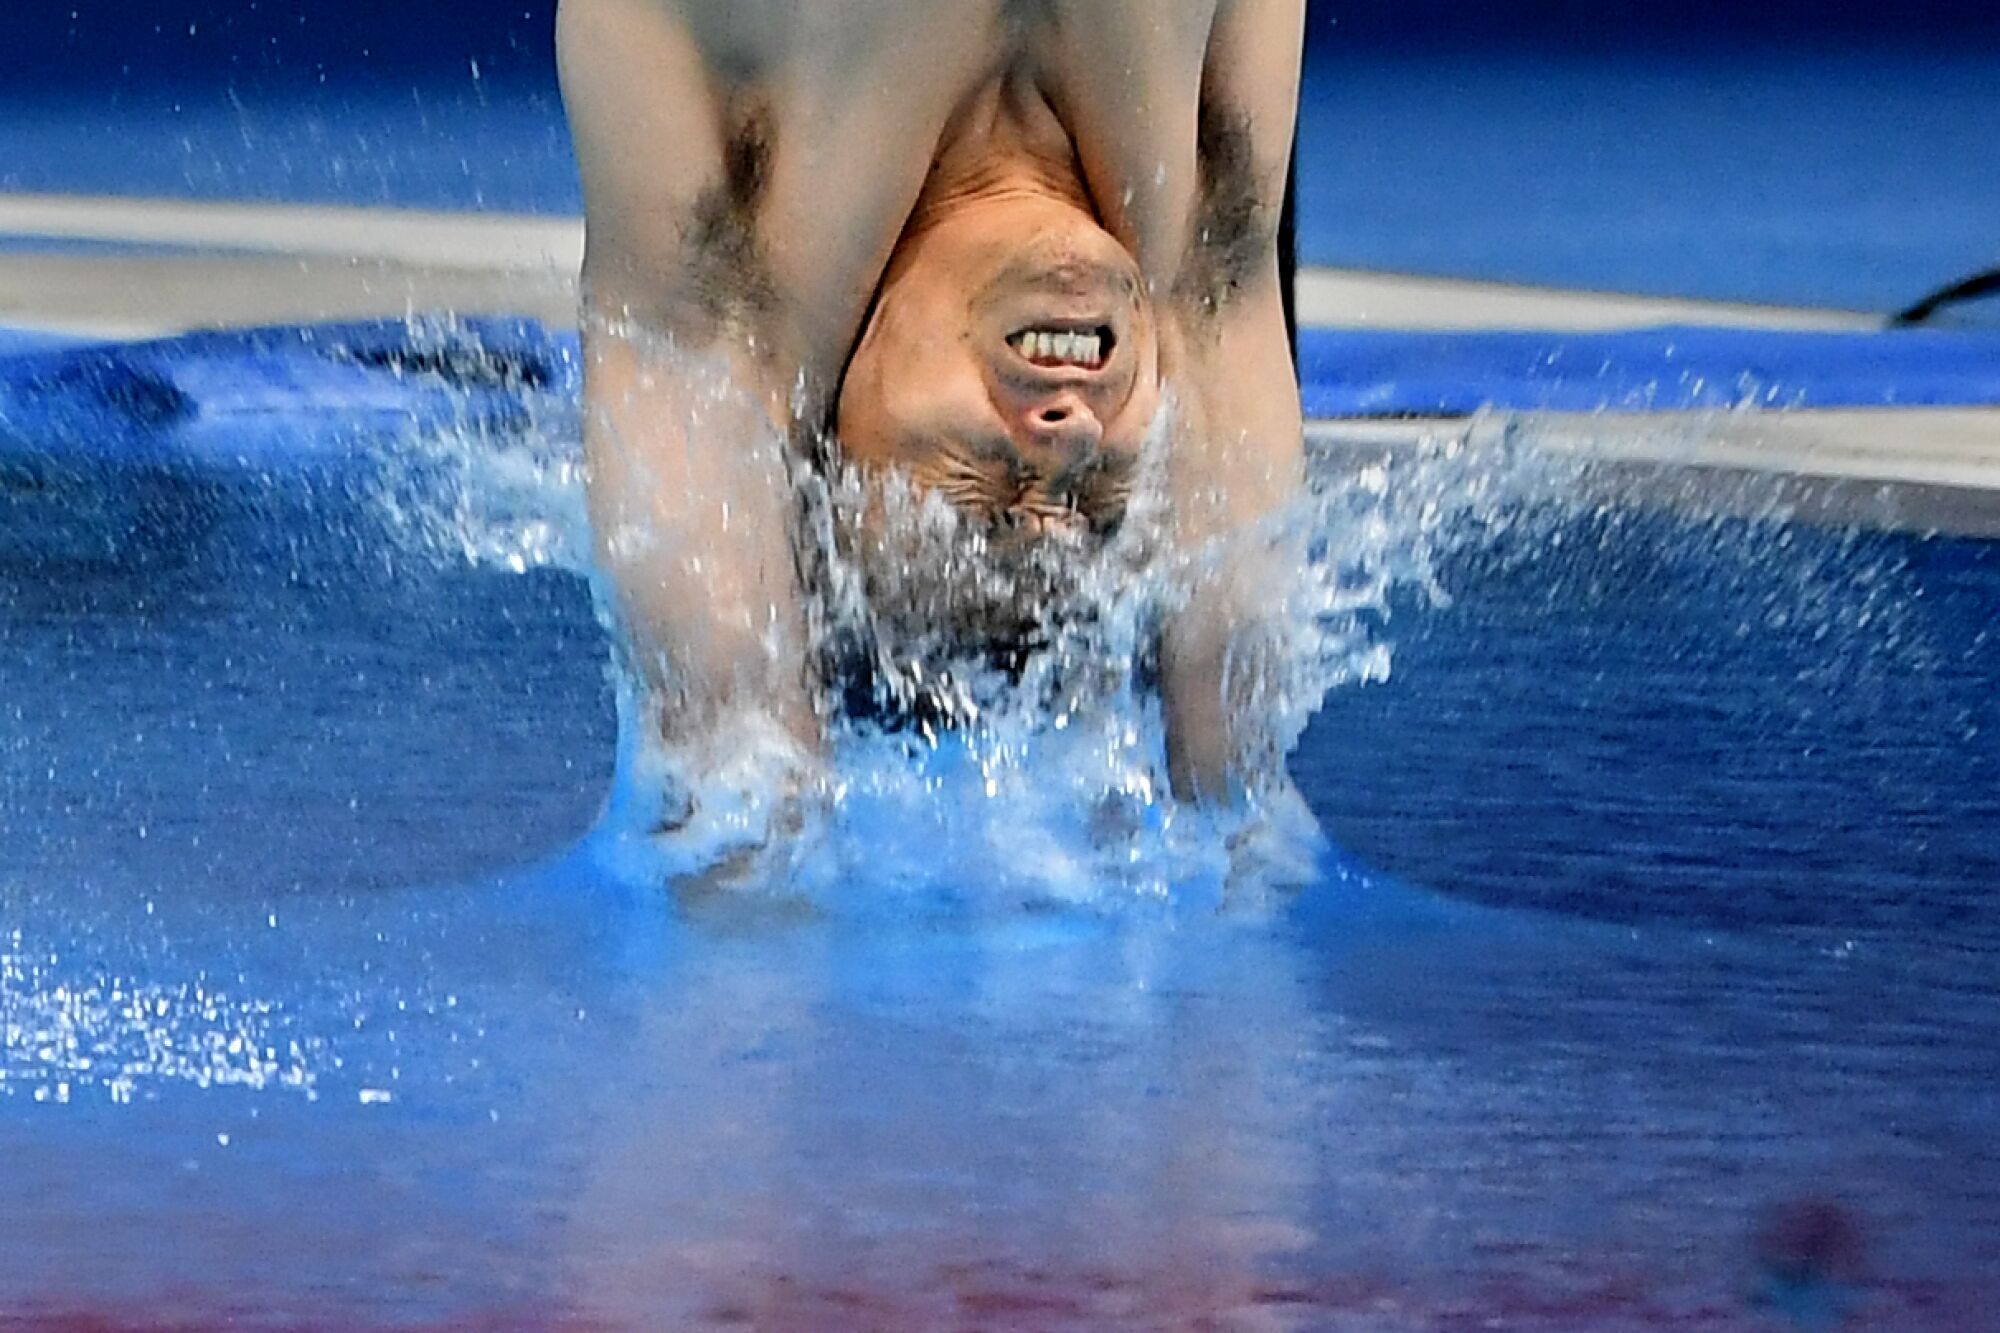 A diver plunges into the pool